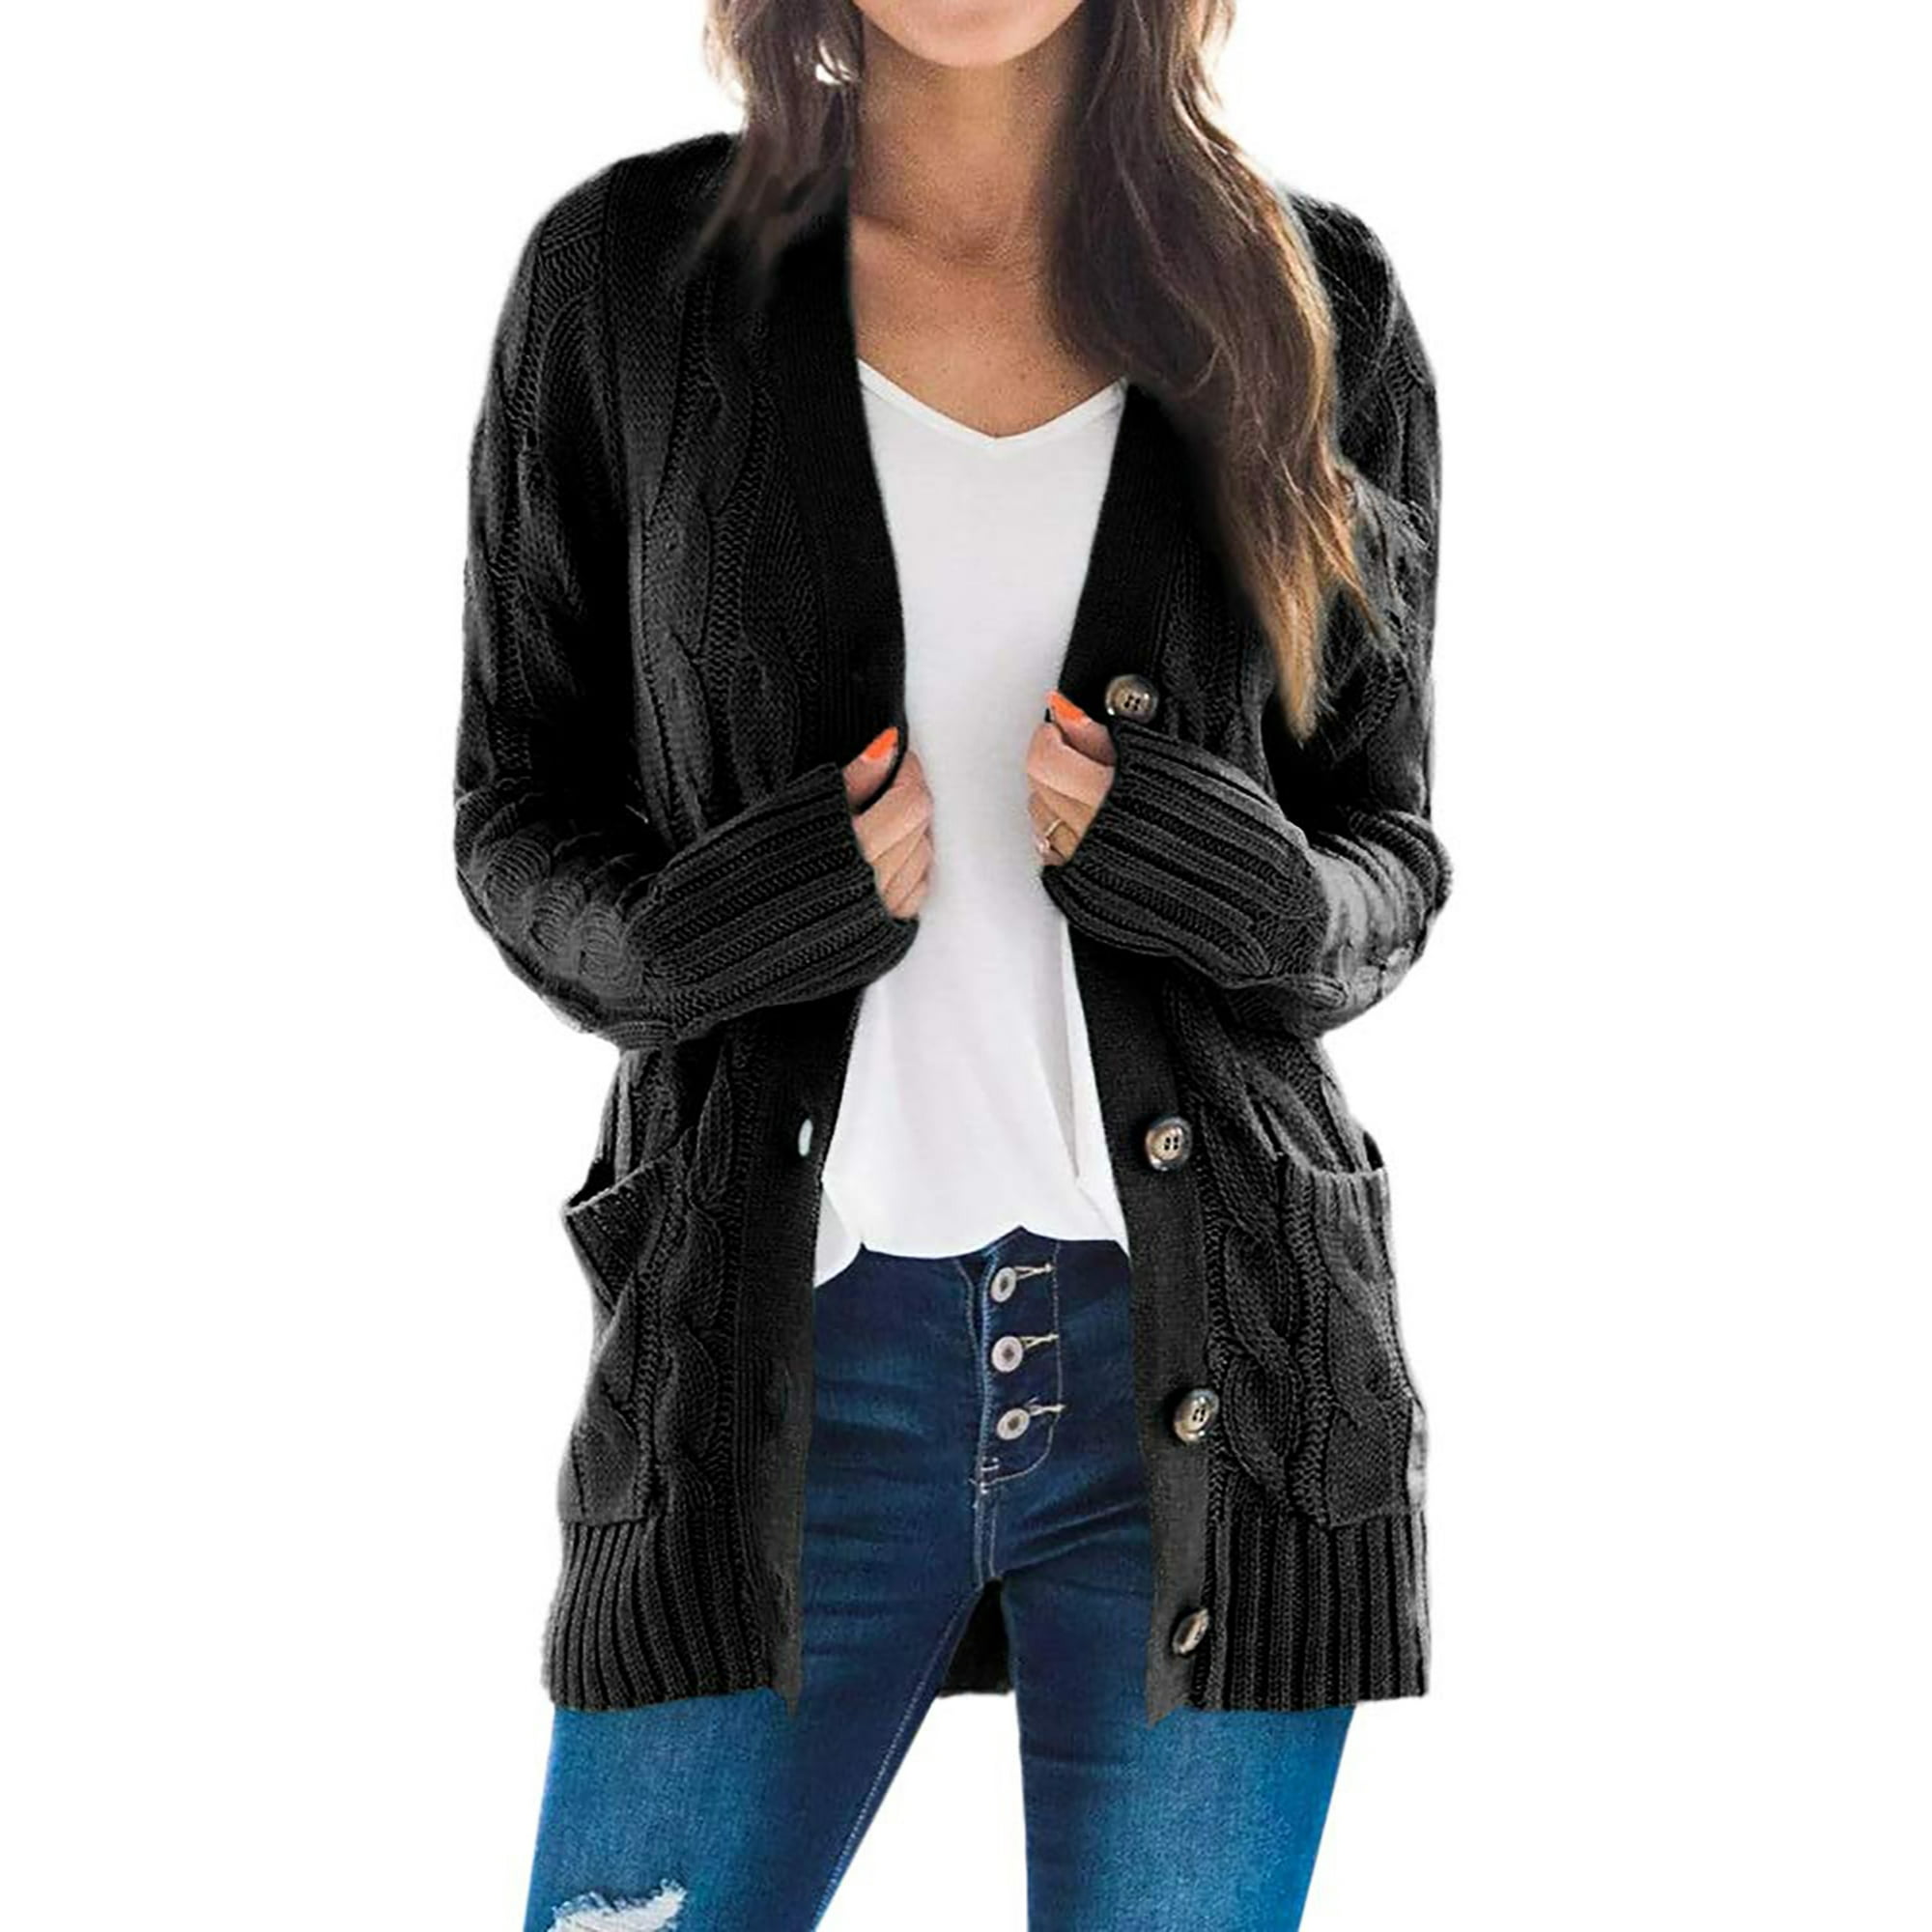 Dokotoo Womens Long Sleeve Cable Cardigans Button Down Cardigan Plus Size Black Cardigans Pockets Walmart.com